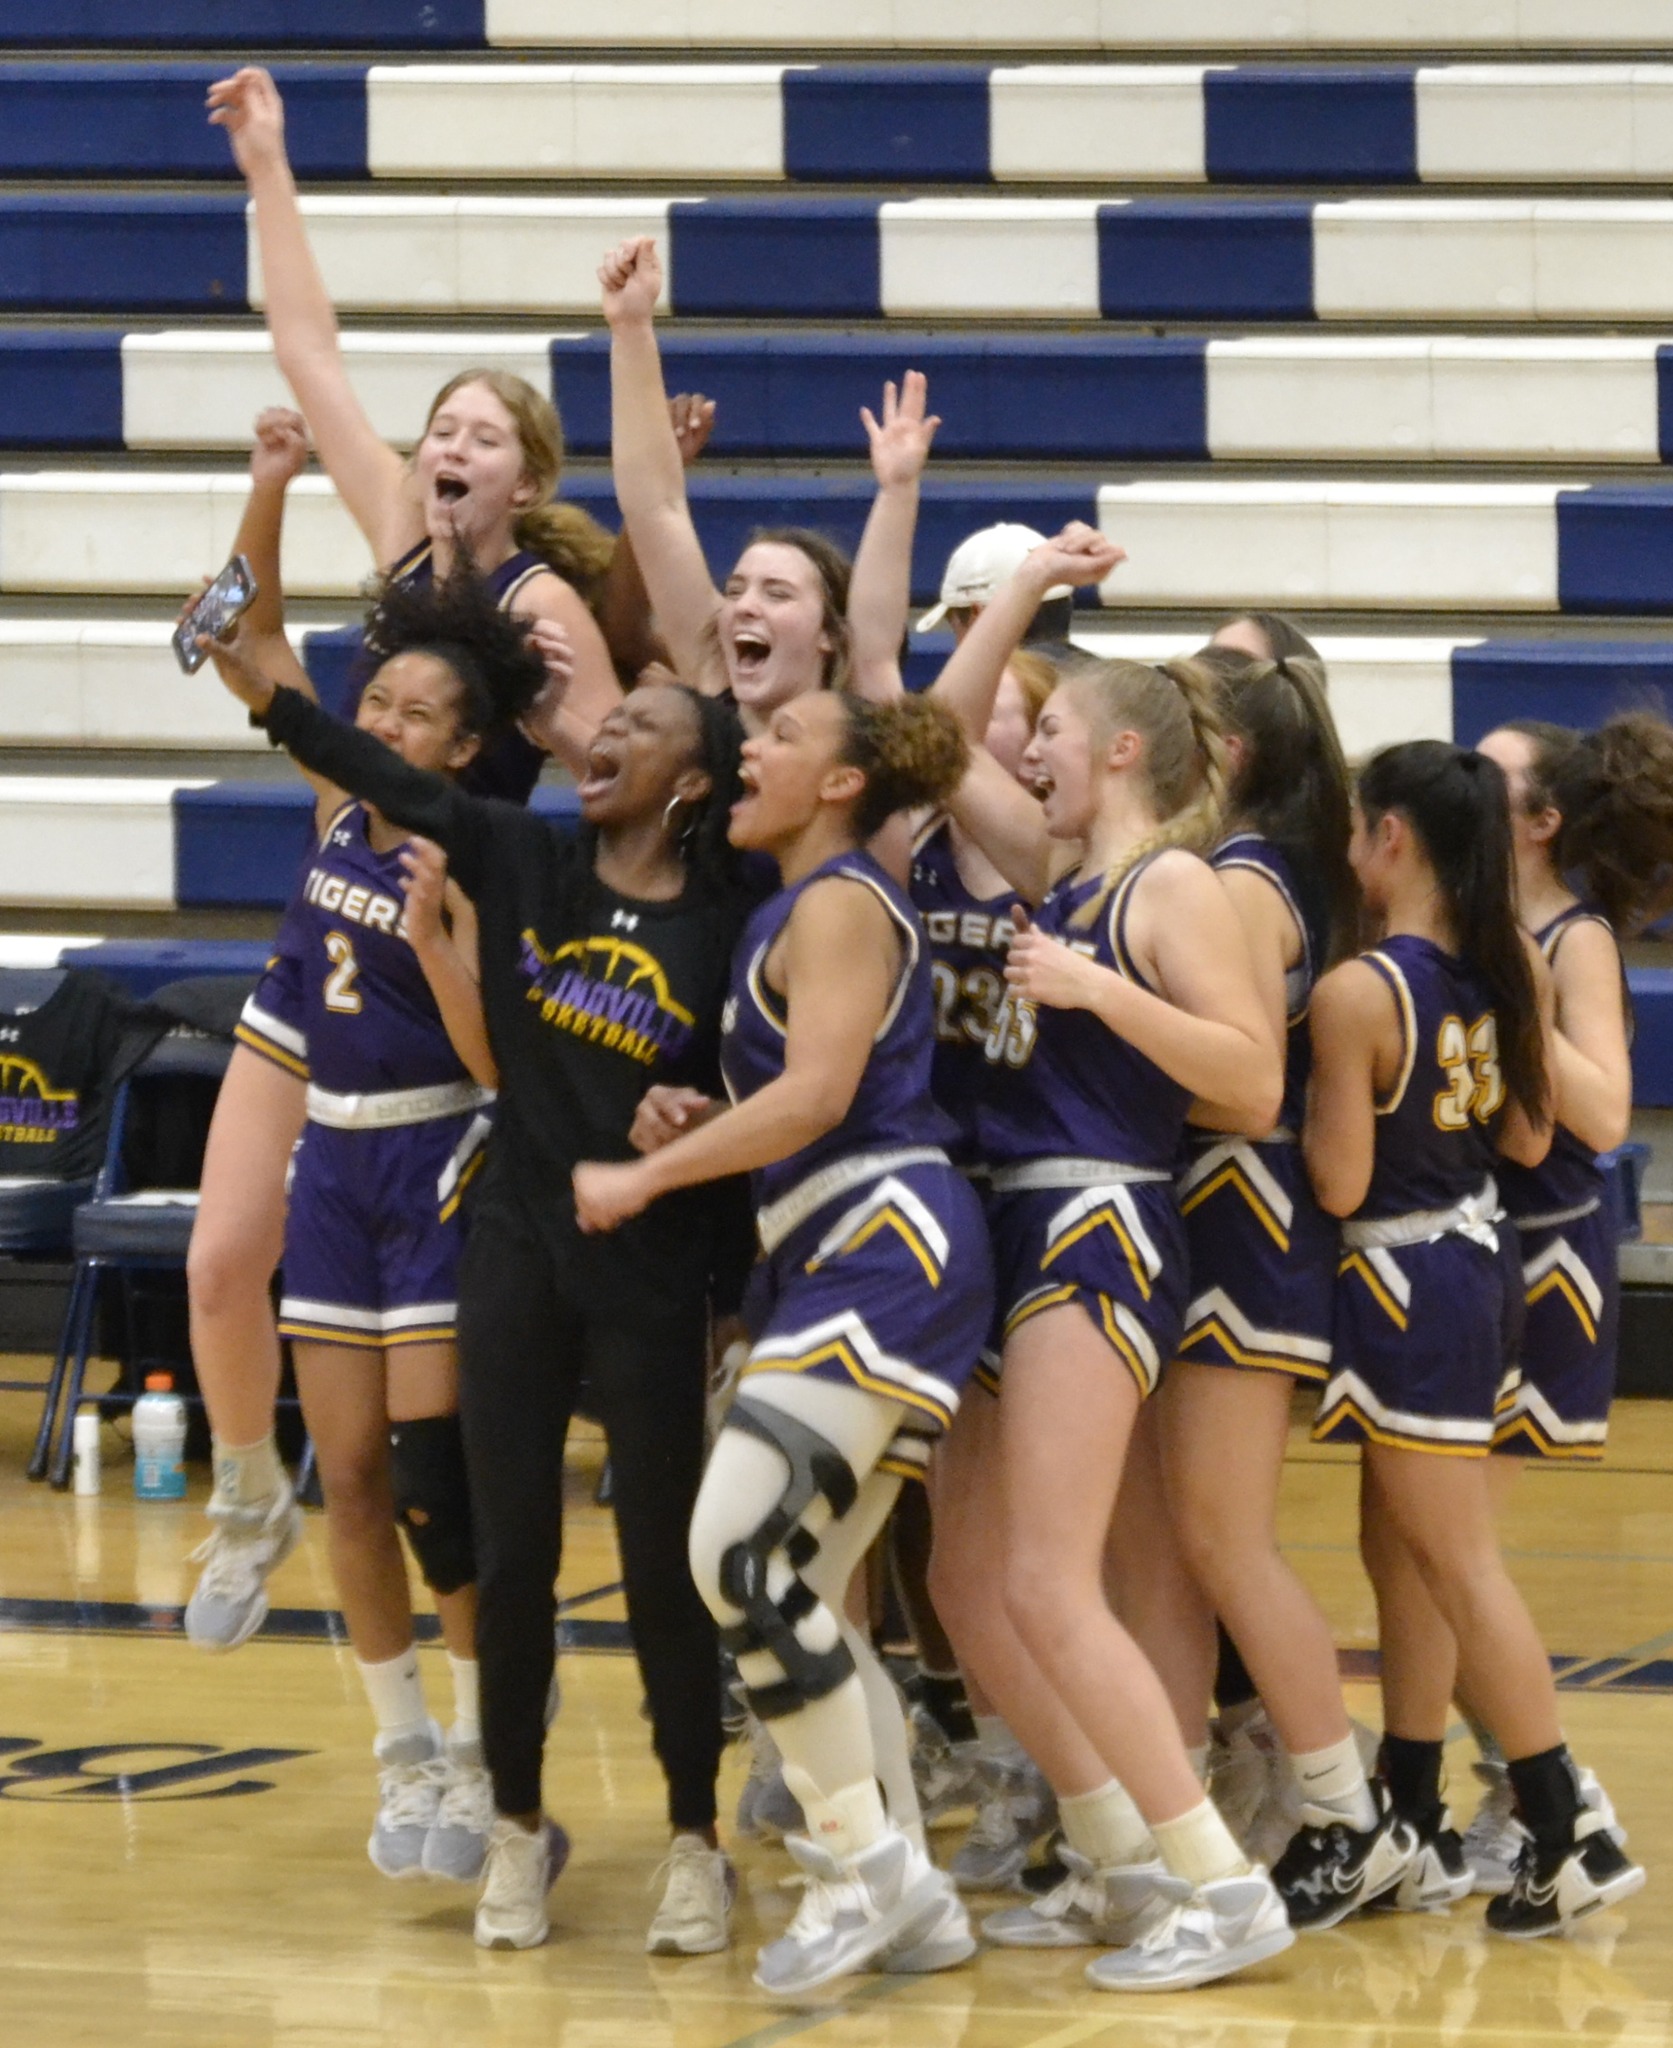 Inspired Springville girls beat Moody for area championship